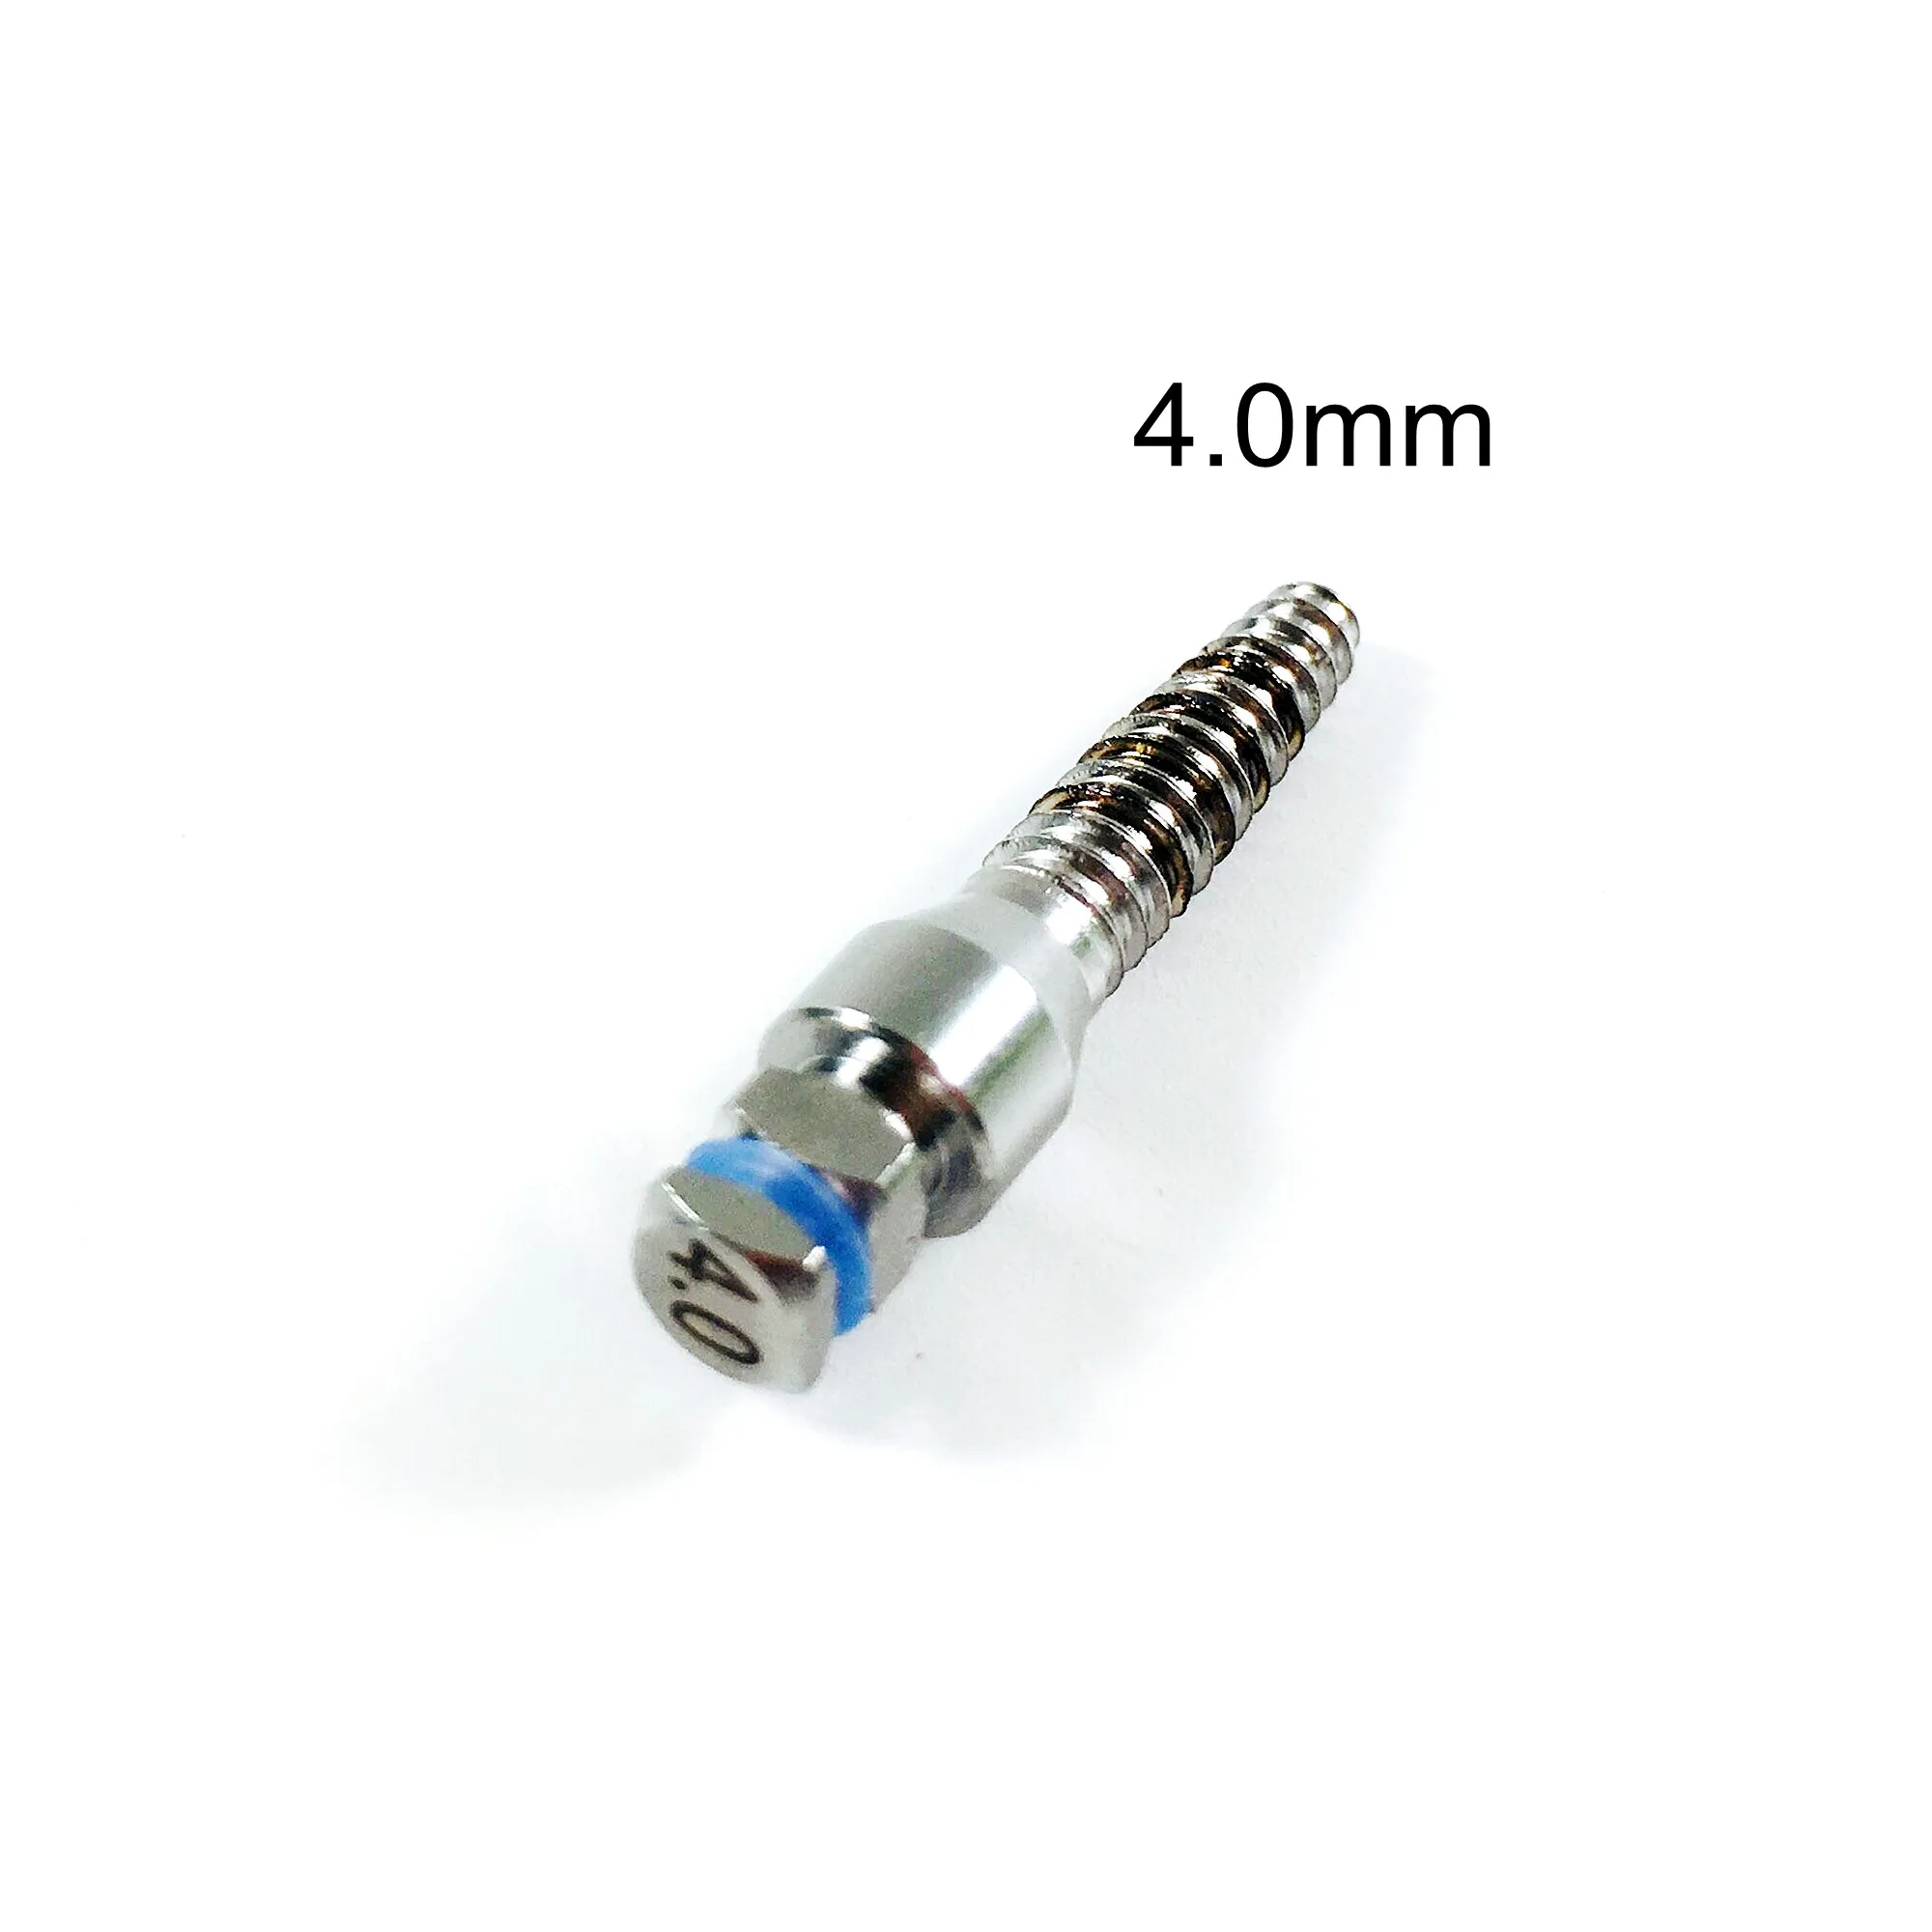 

4.0mm Dental SS Implant Bone Sinus Lift Surgical Tool Expander Compression Scews Stainless Steel